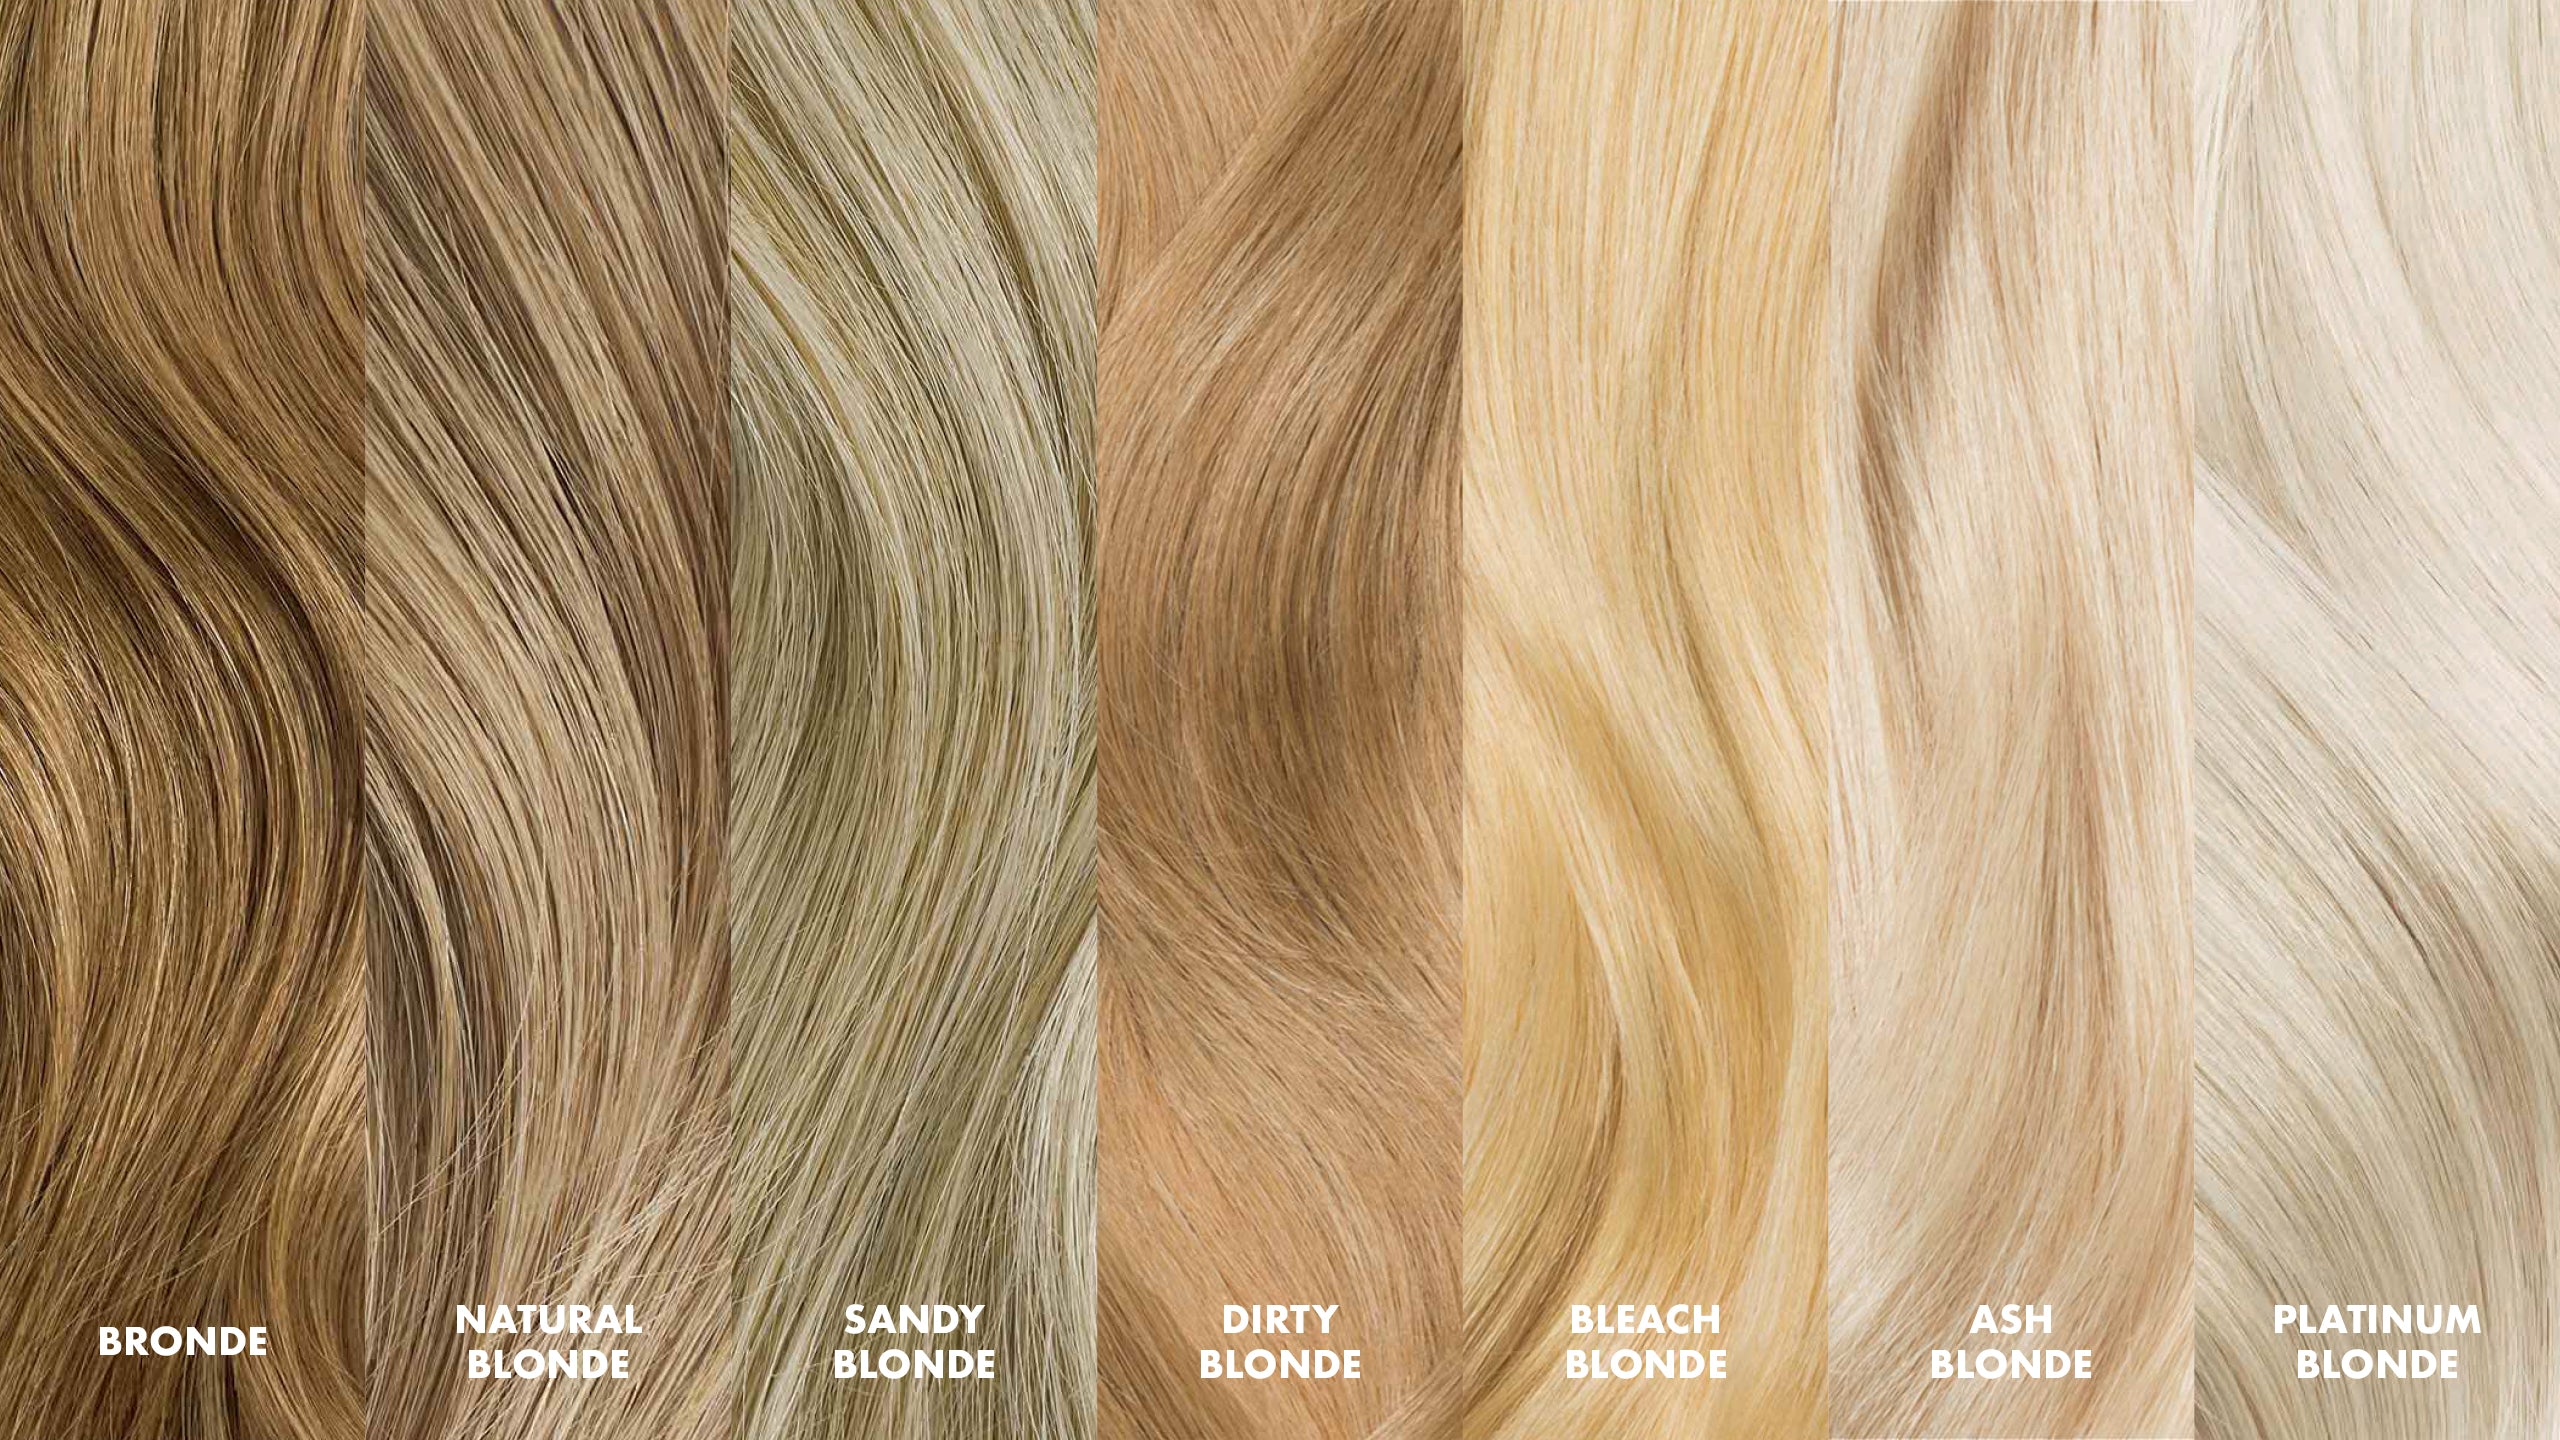 4. "Bleach Blonde vs. Golden Blonde: What's the Difference?" - wide 10